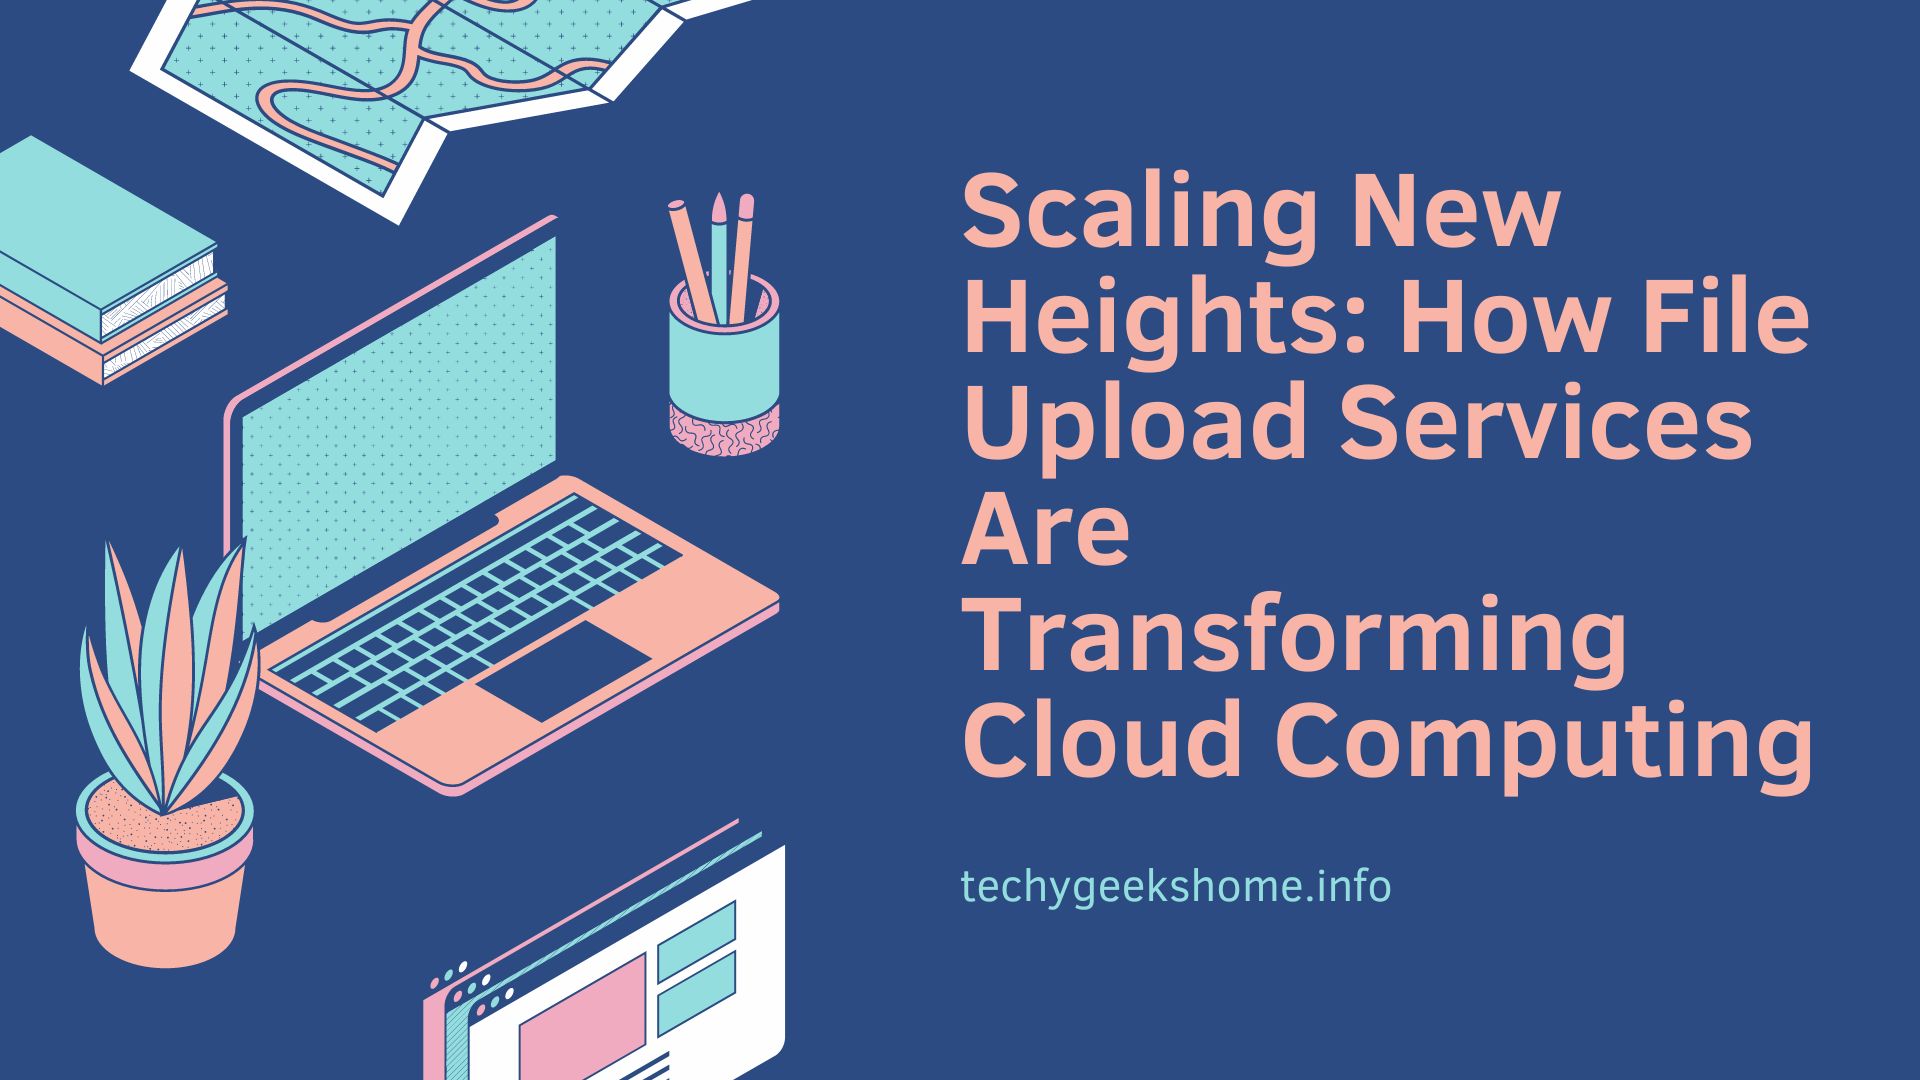 Scaling New Heights: How File Upload Services Are Transforming Cloud Computing